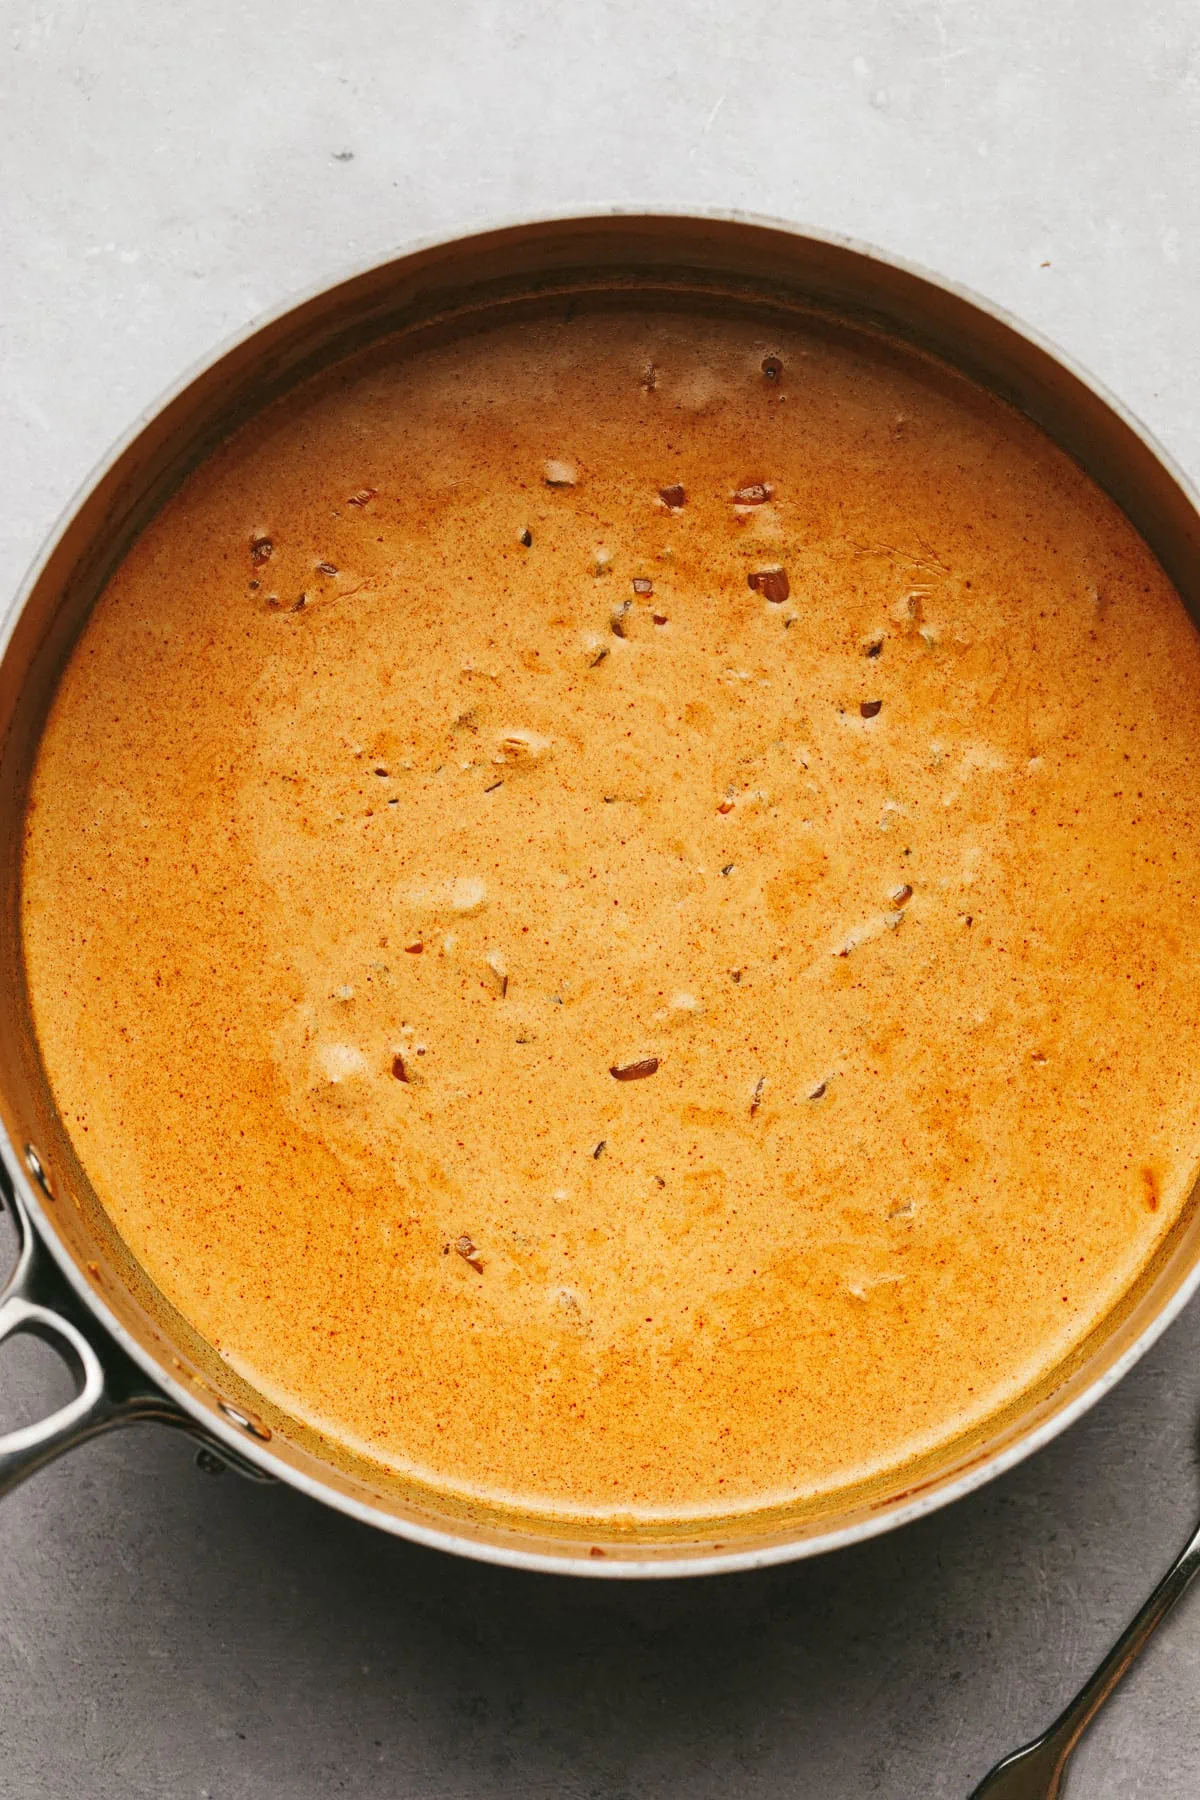 Paprika sauce in a stainless steal pan on a gray surface.